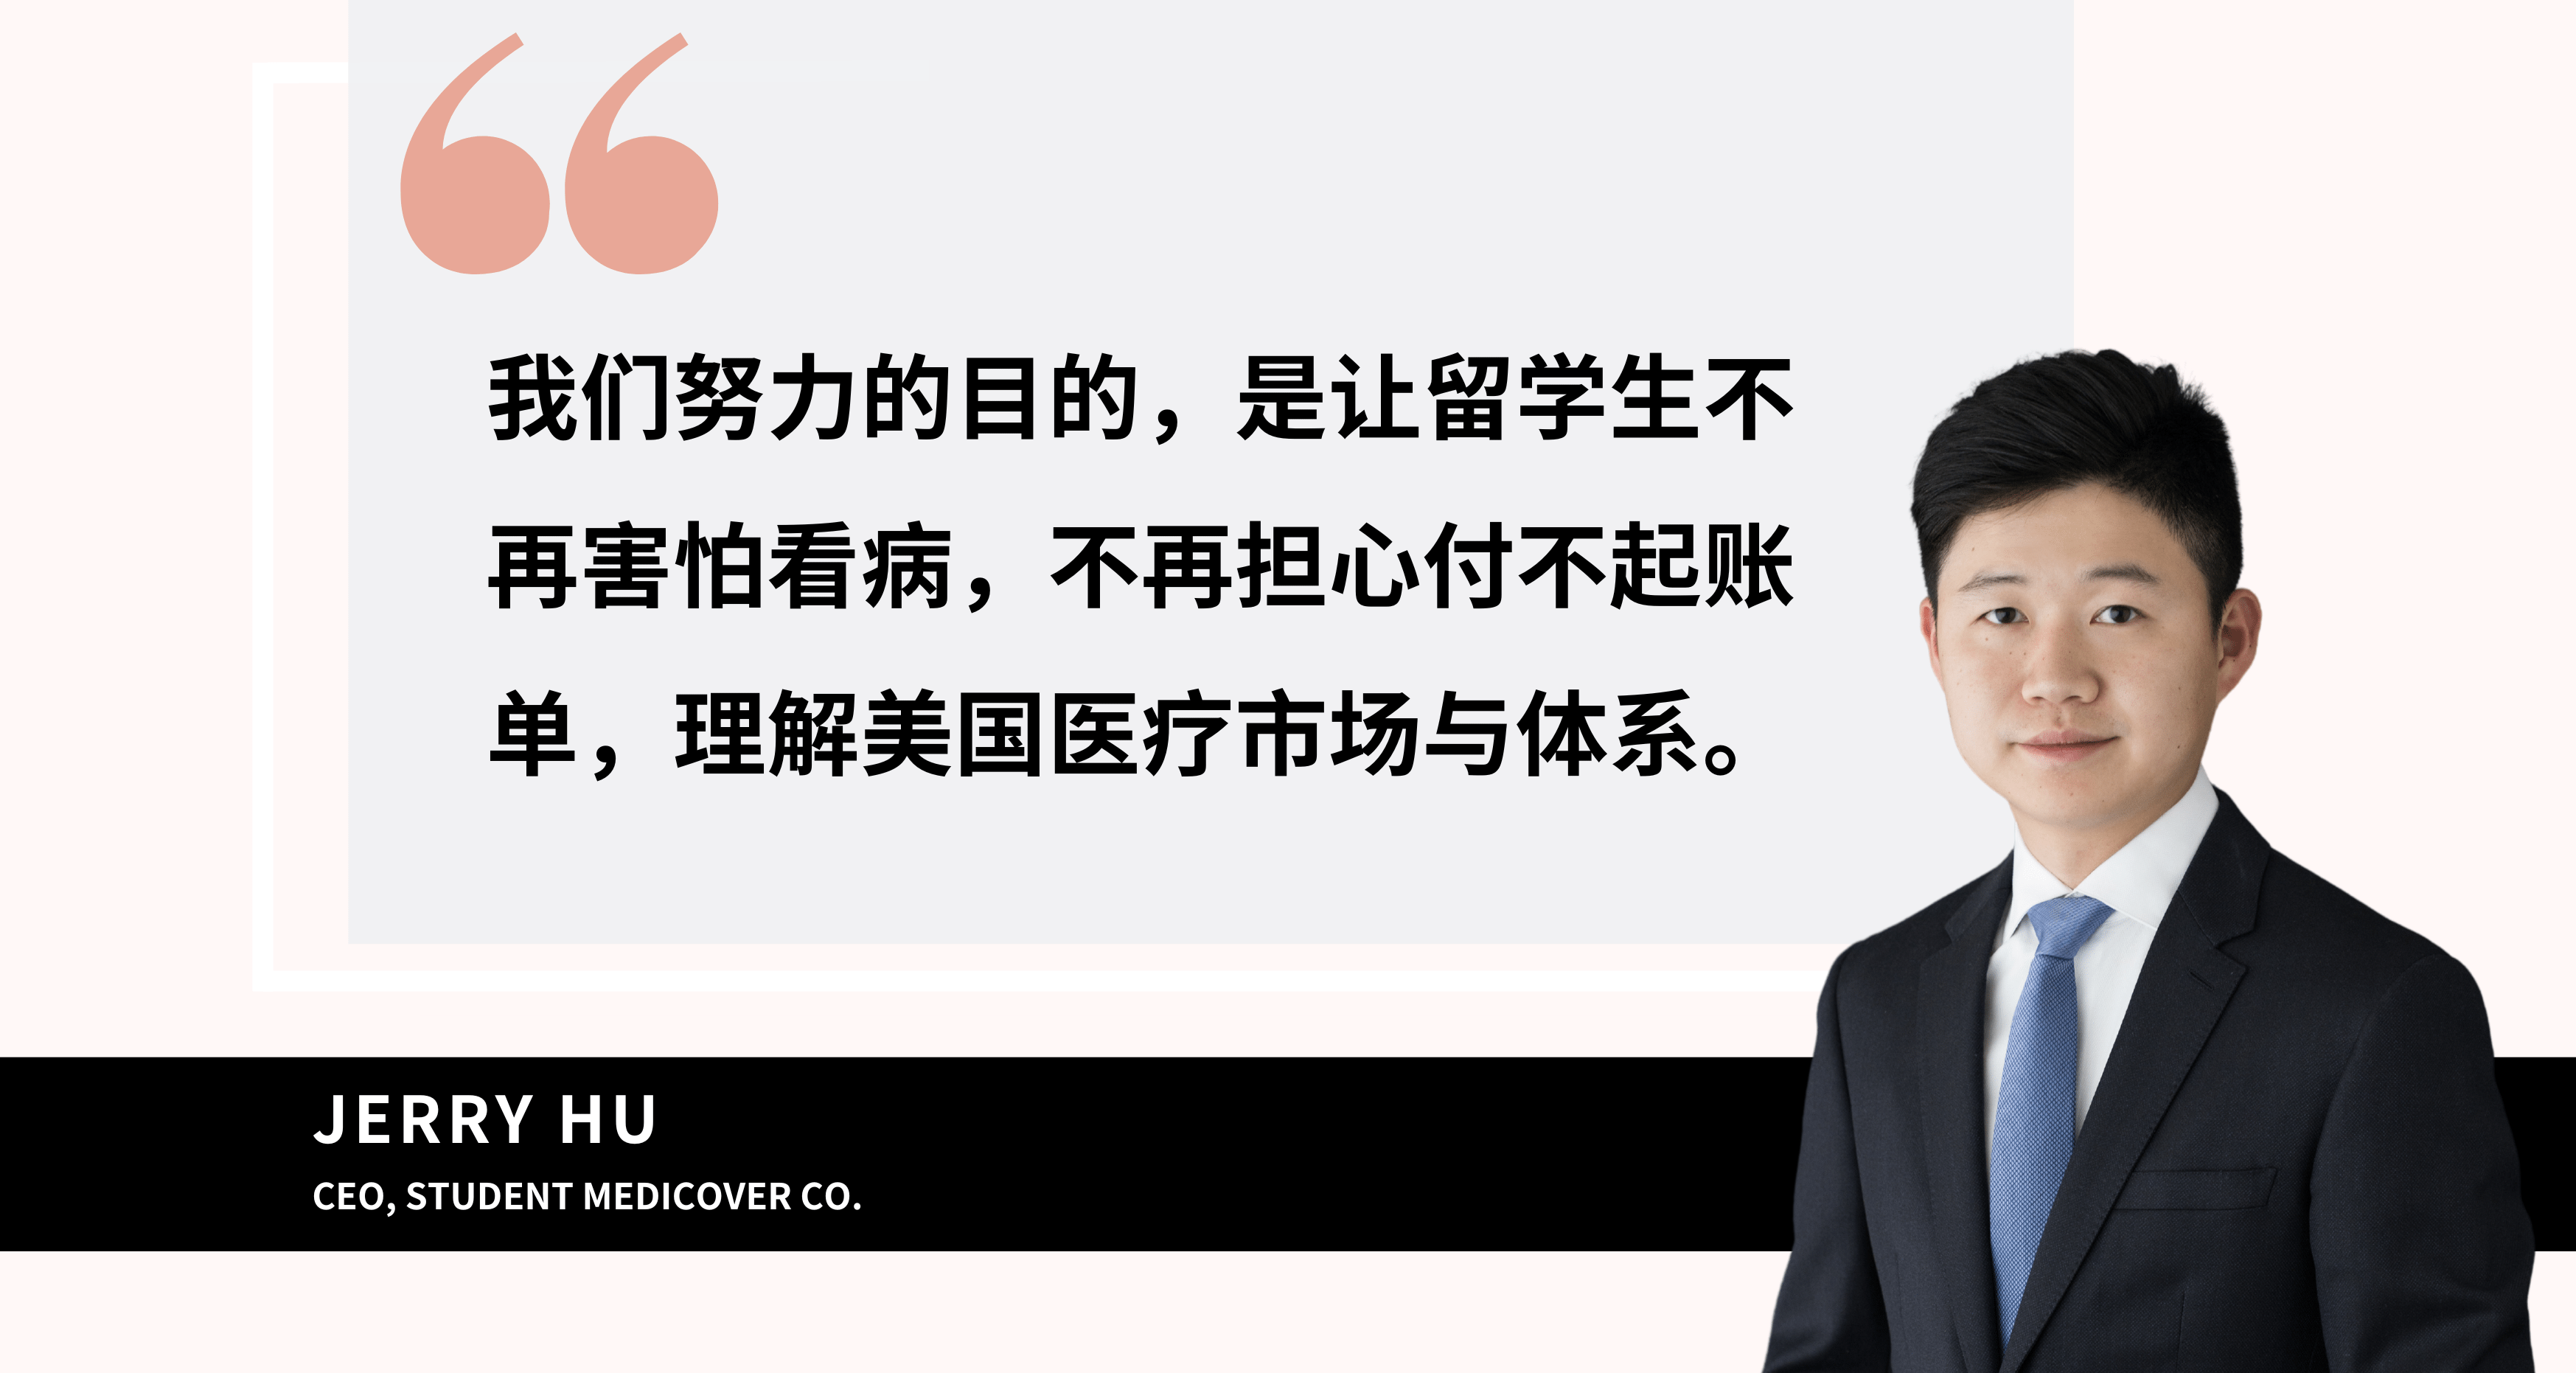 jerry hu Student Medicover CEO